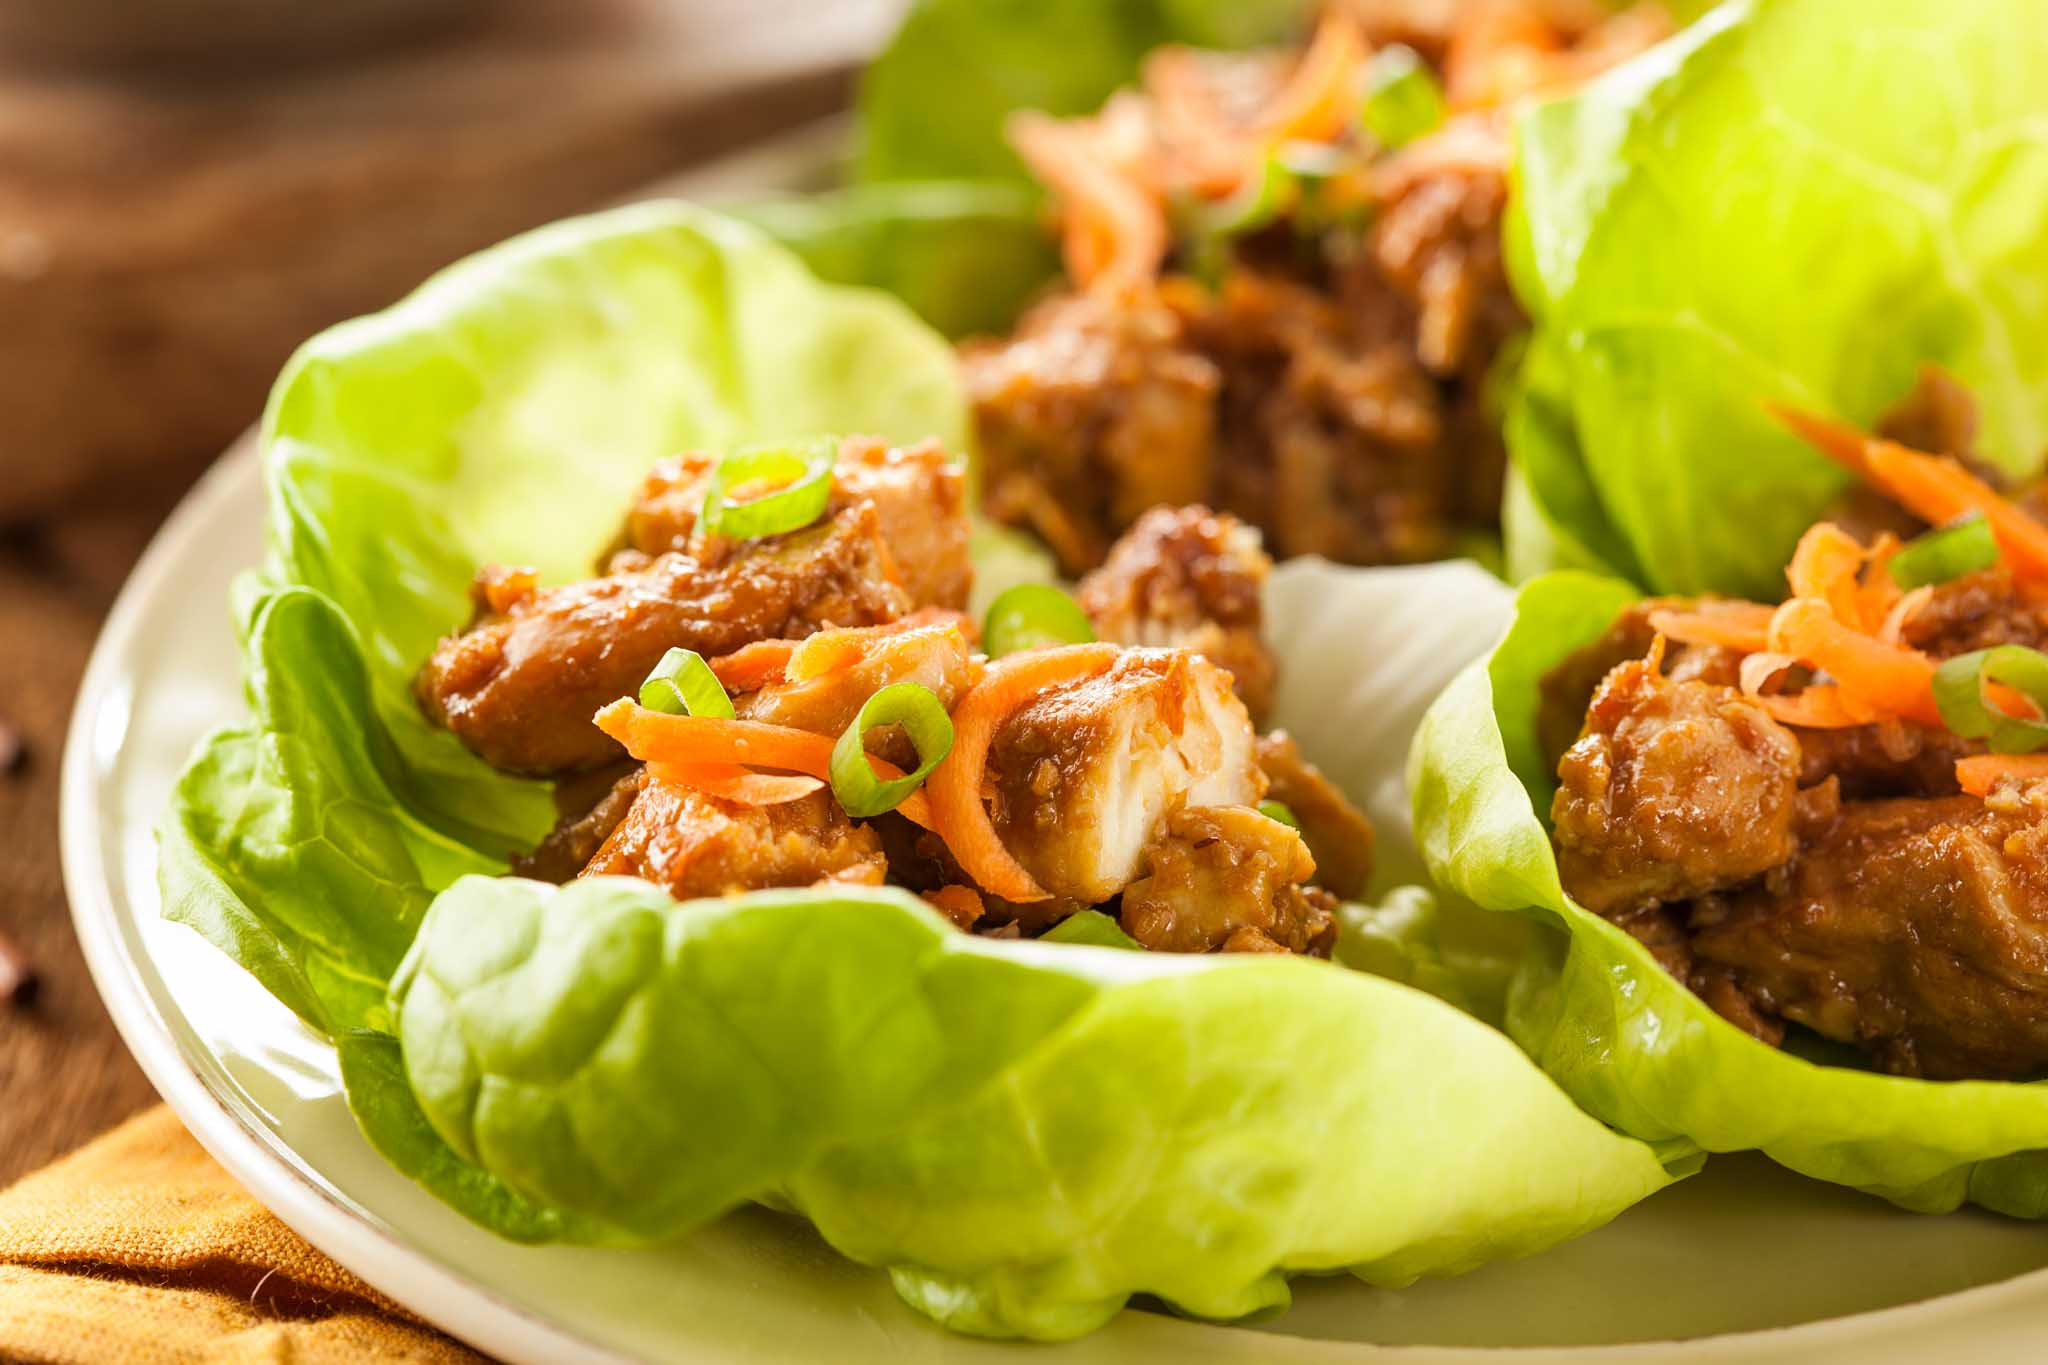 The Real Food Academy lettuce wraps with chicken and rice.